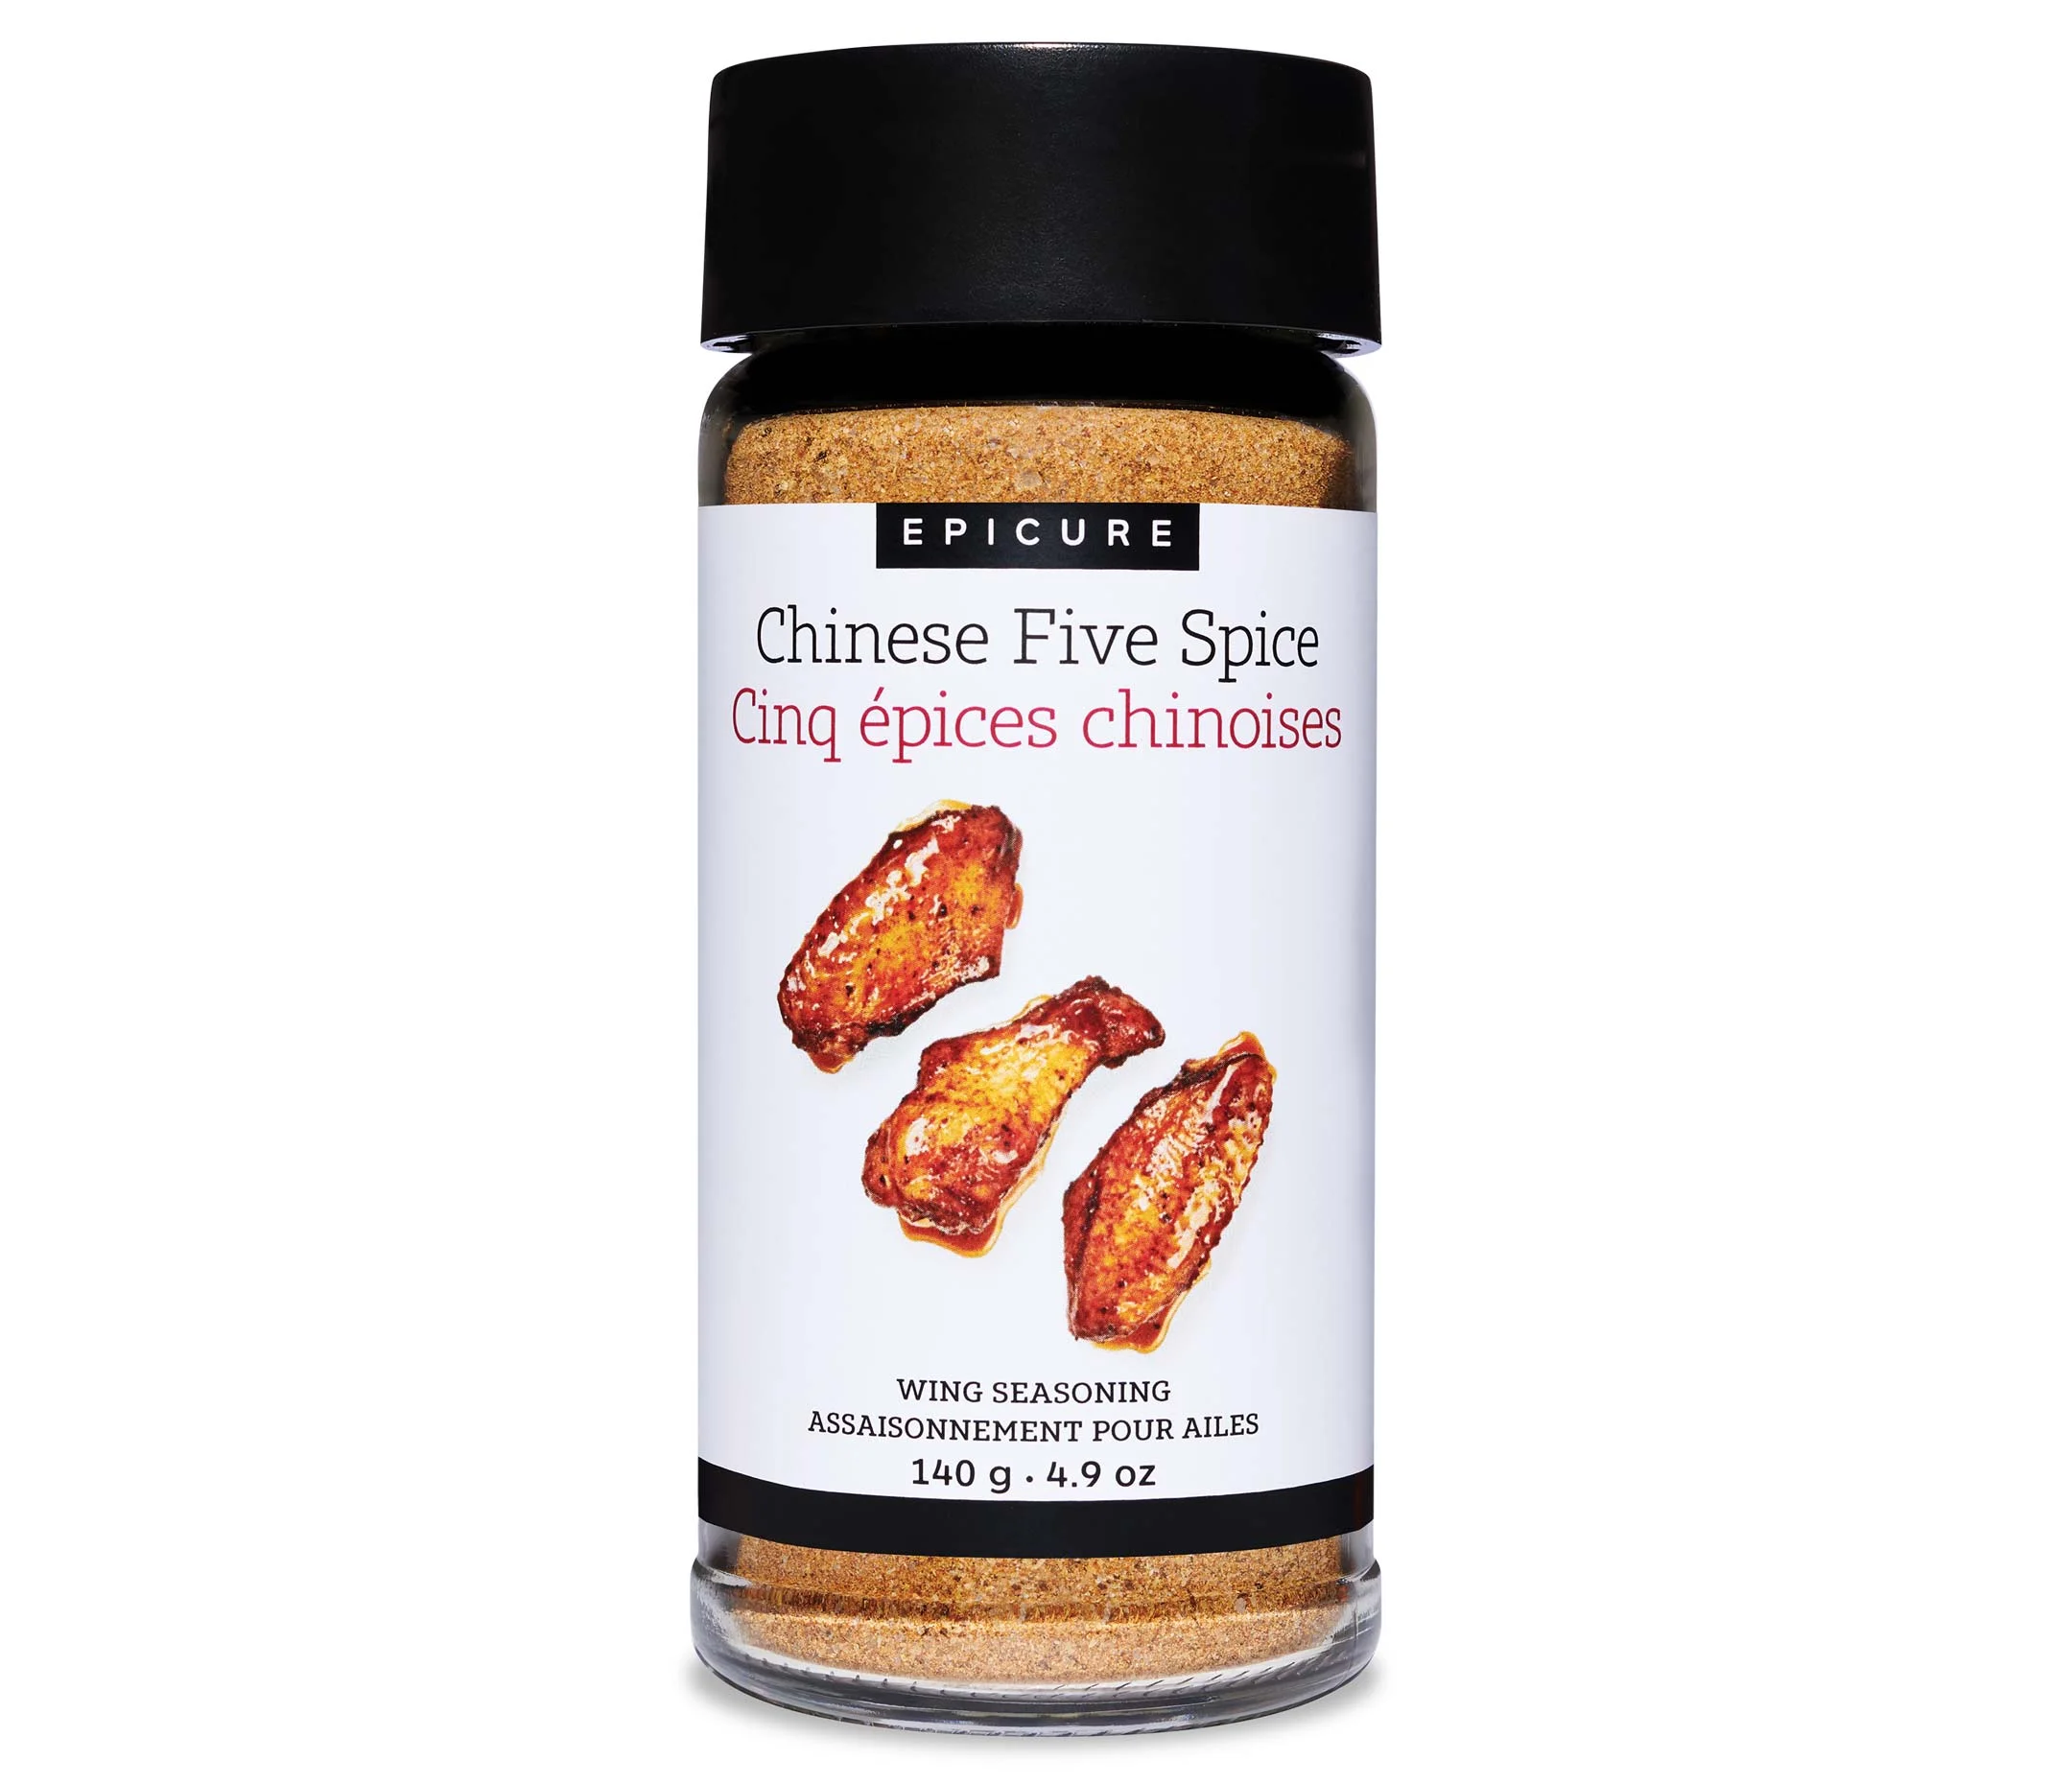 Chinese Five Spice Wing Seasoning